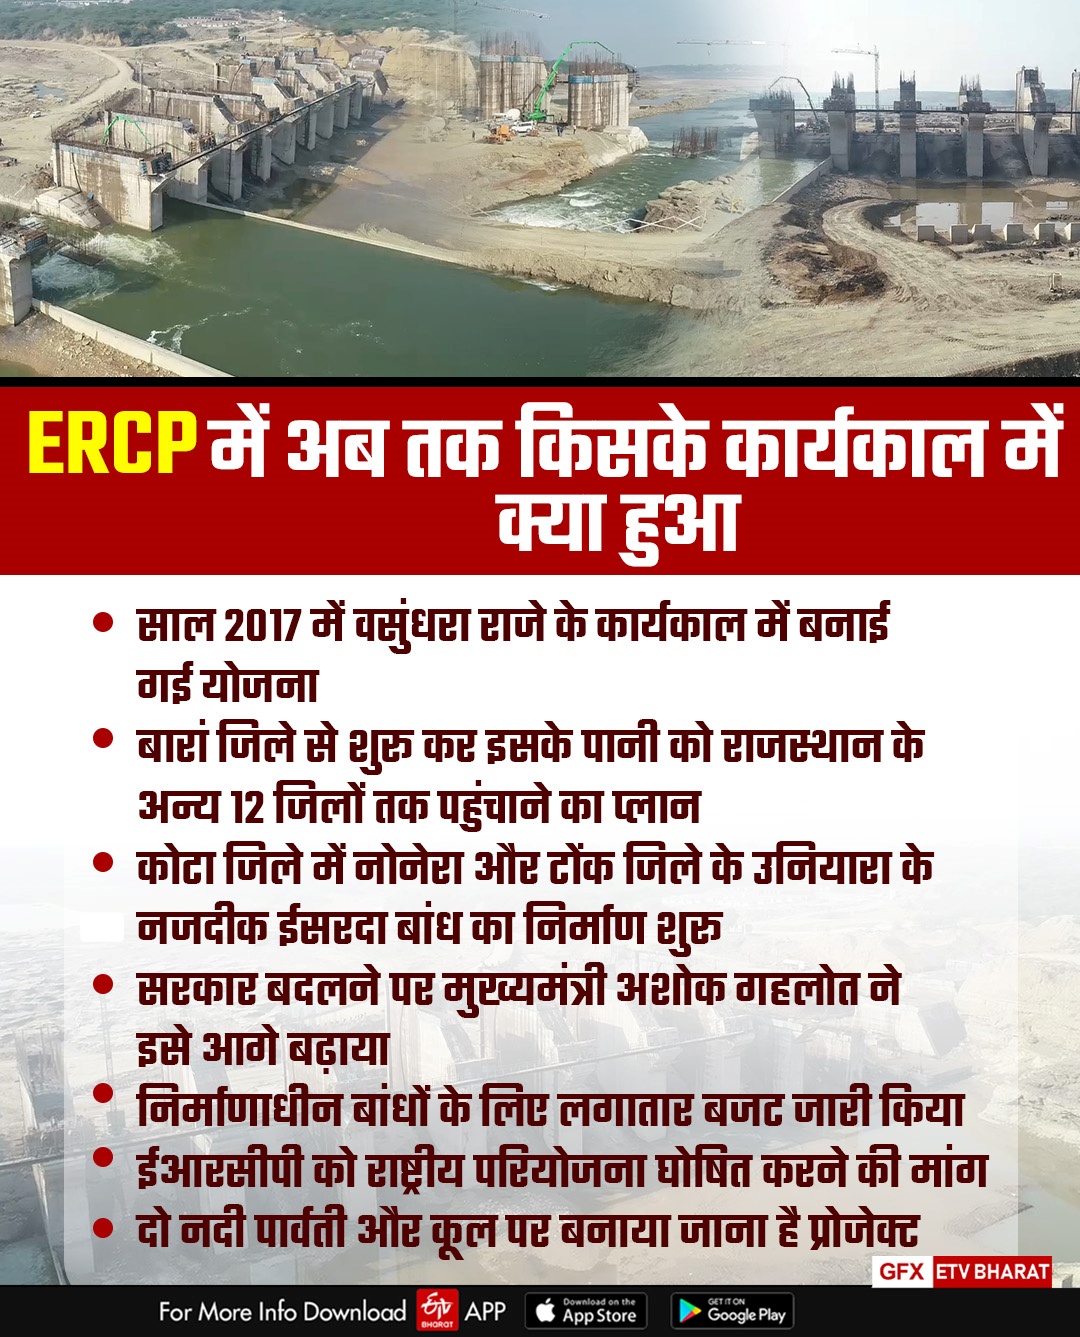 Huge Issue of Rajasthan ERCP